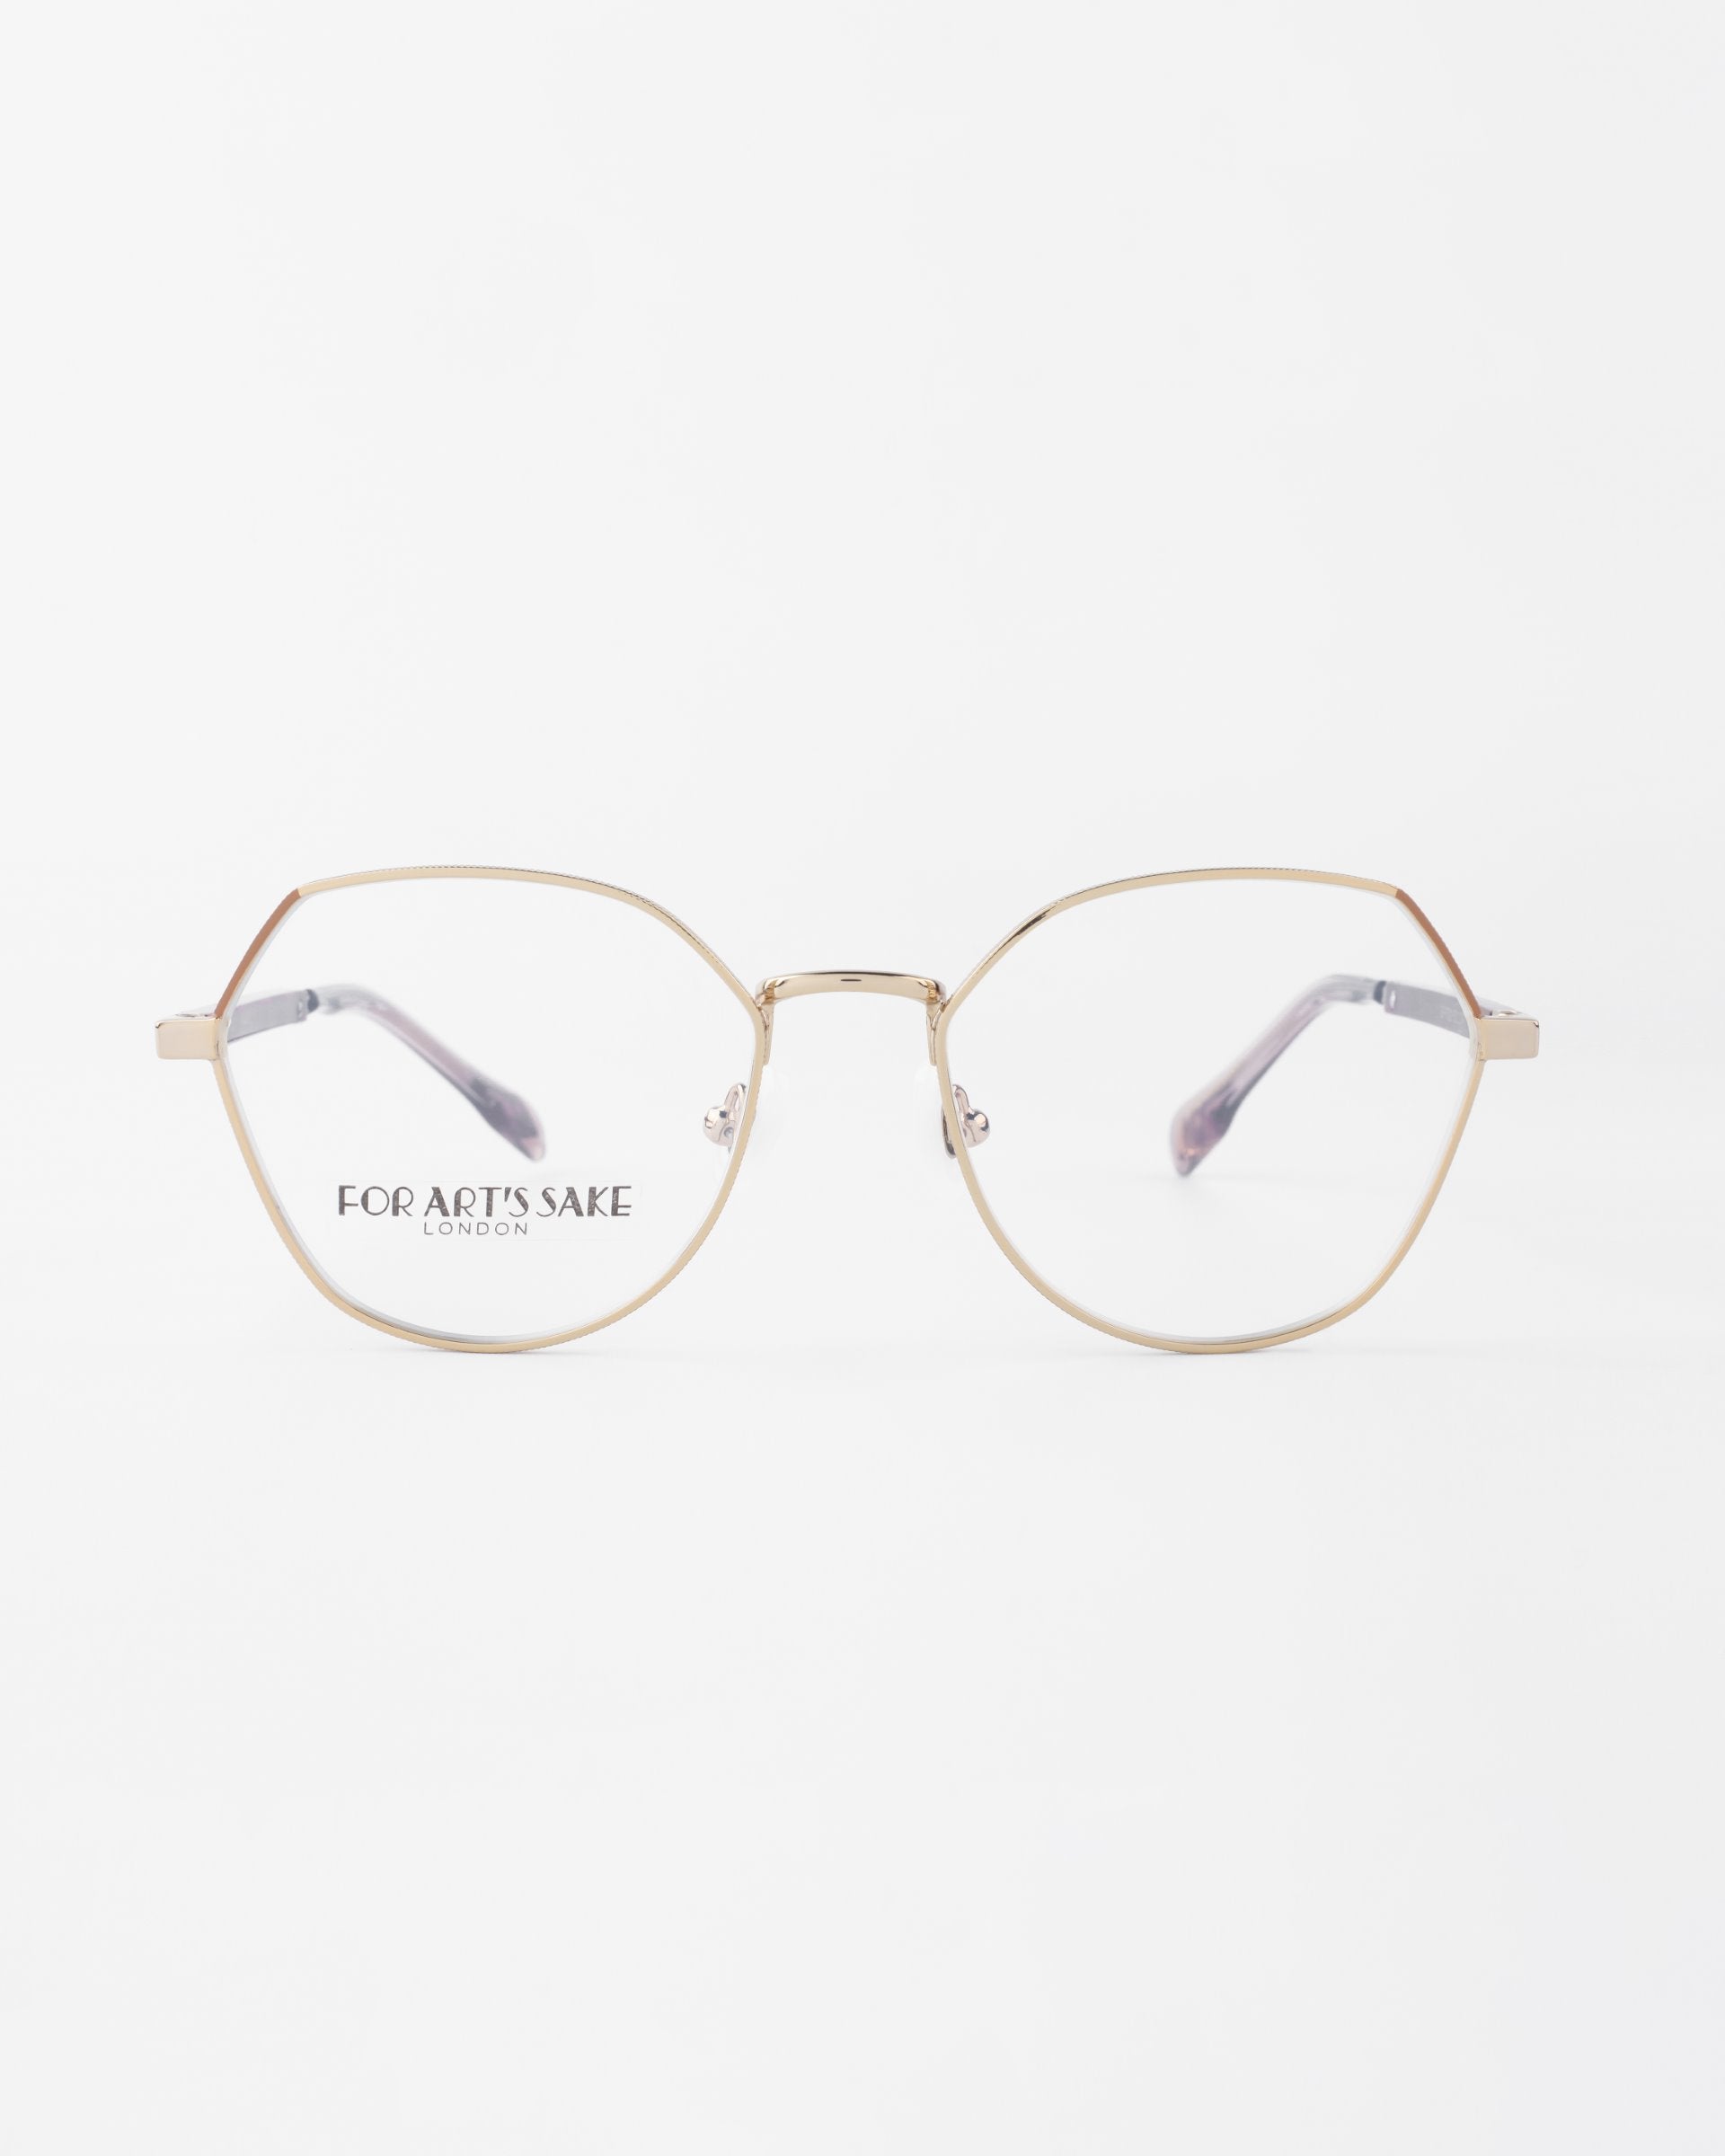 A pair of Orchard eyeglasses with a thin, 18-karat gold-plated frame and round, clear lenses. The brand name "For Art's Sake®" is visible on the left lens. The background is plain white, emphasizing the delicate design of these elegant glasses, which also feature optional prescription lenses.